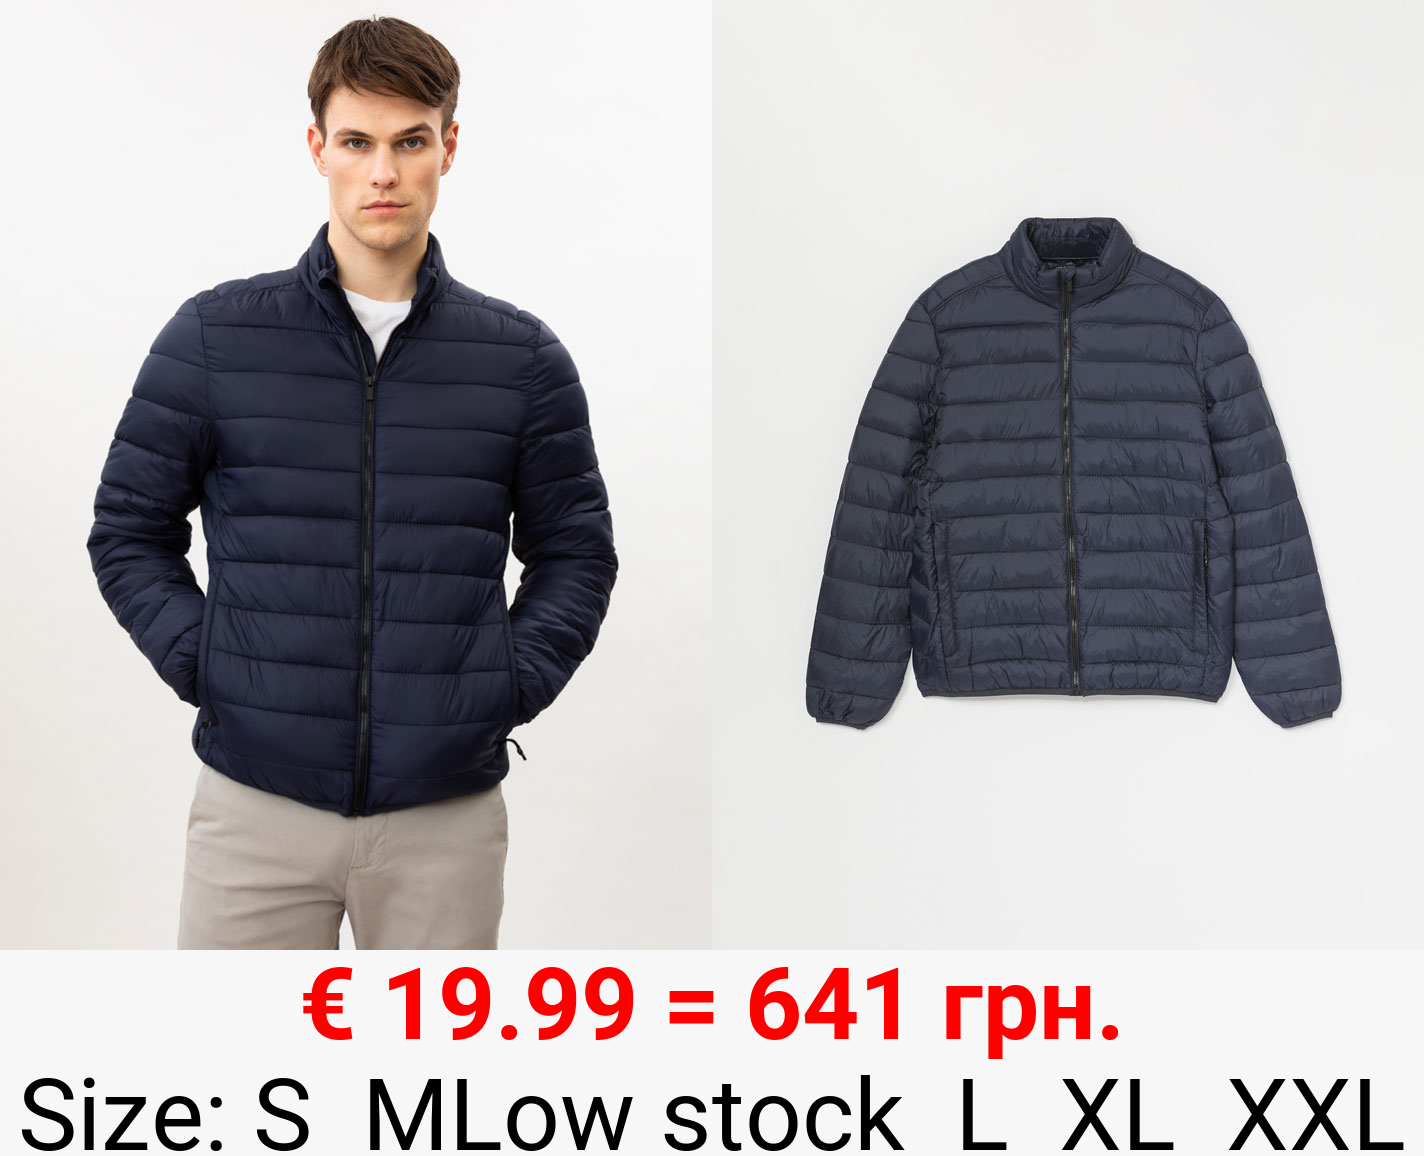 Lightweight Quilted Jacket